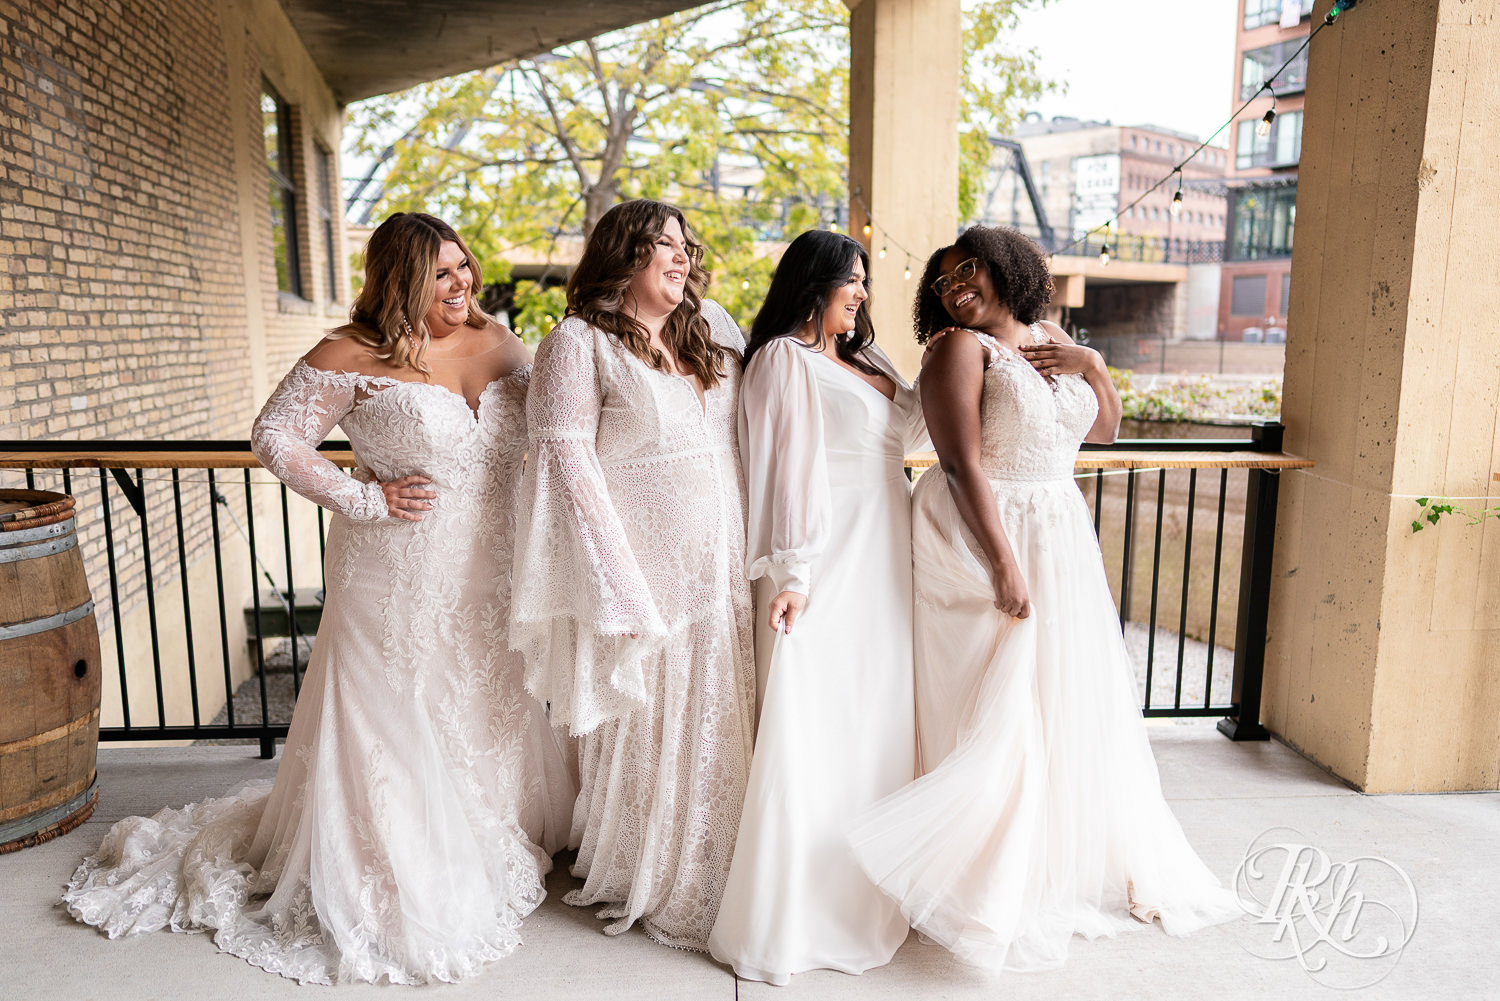 Plus size brides smiling and laughing in wedding dresses in Minneapolis, Minnesota.